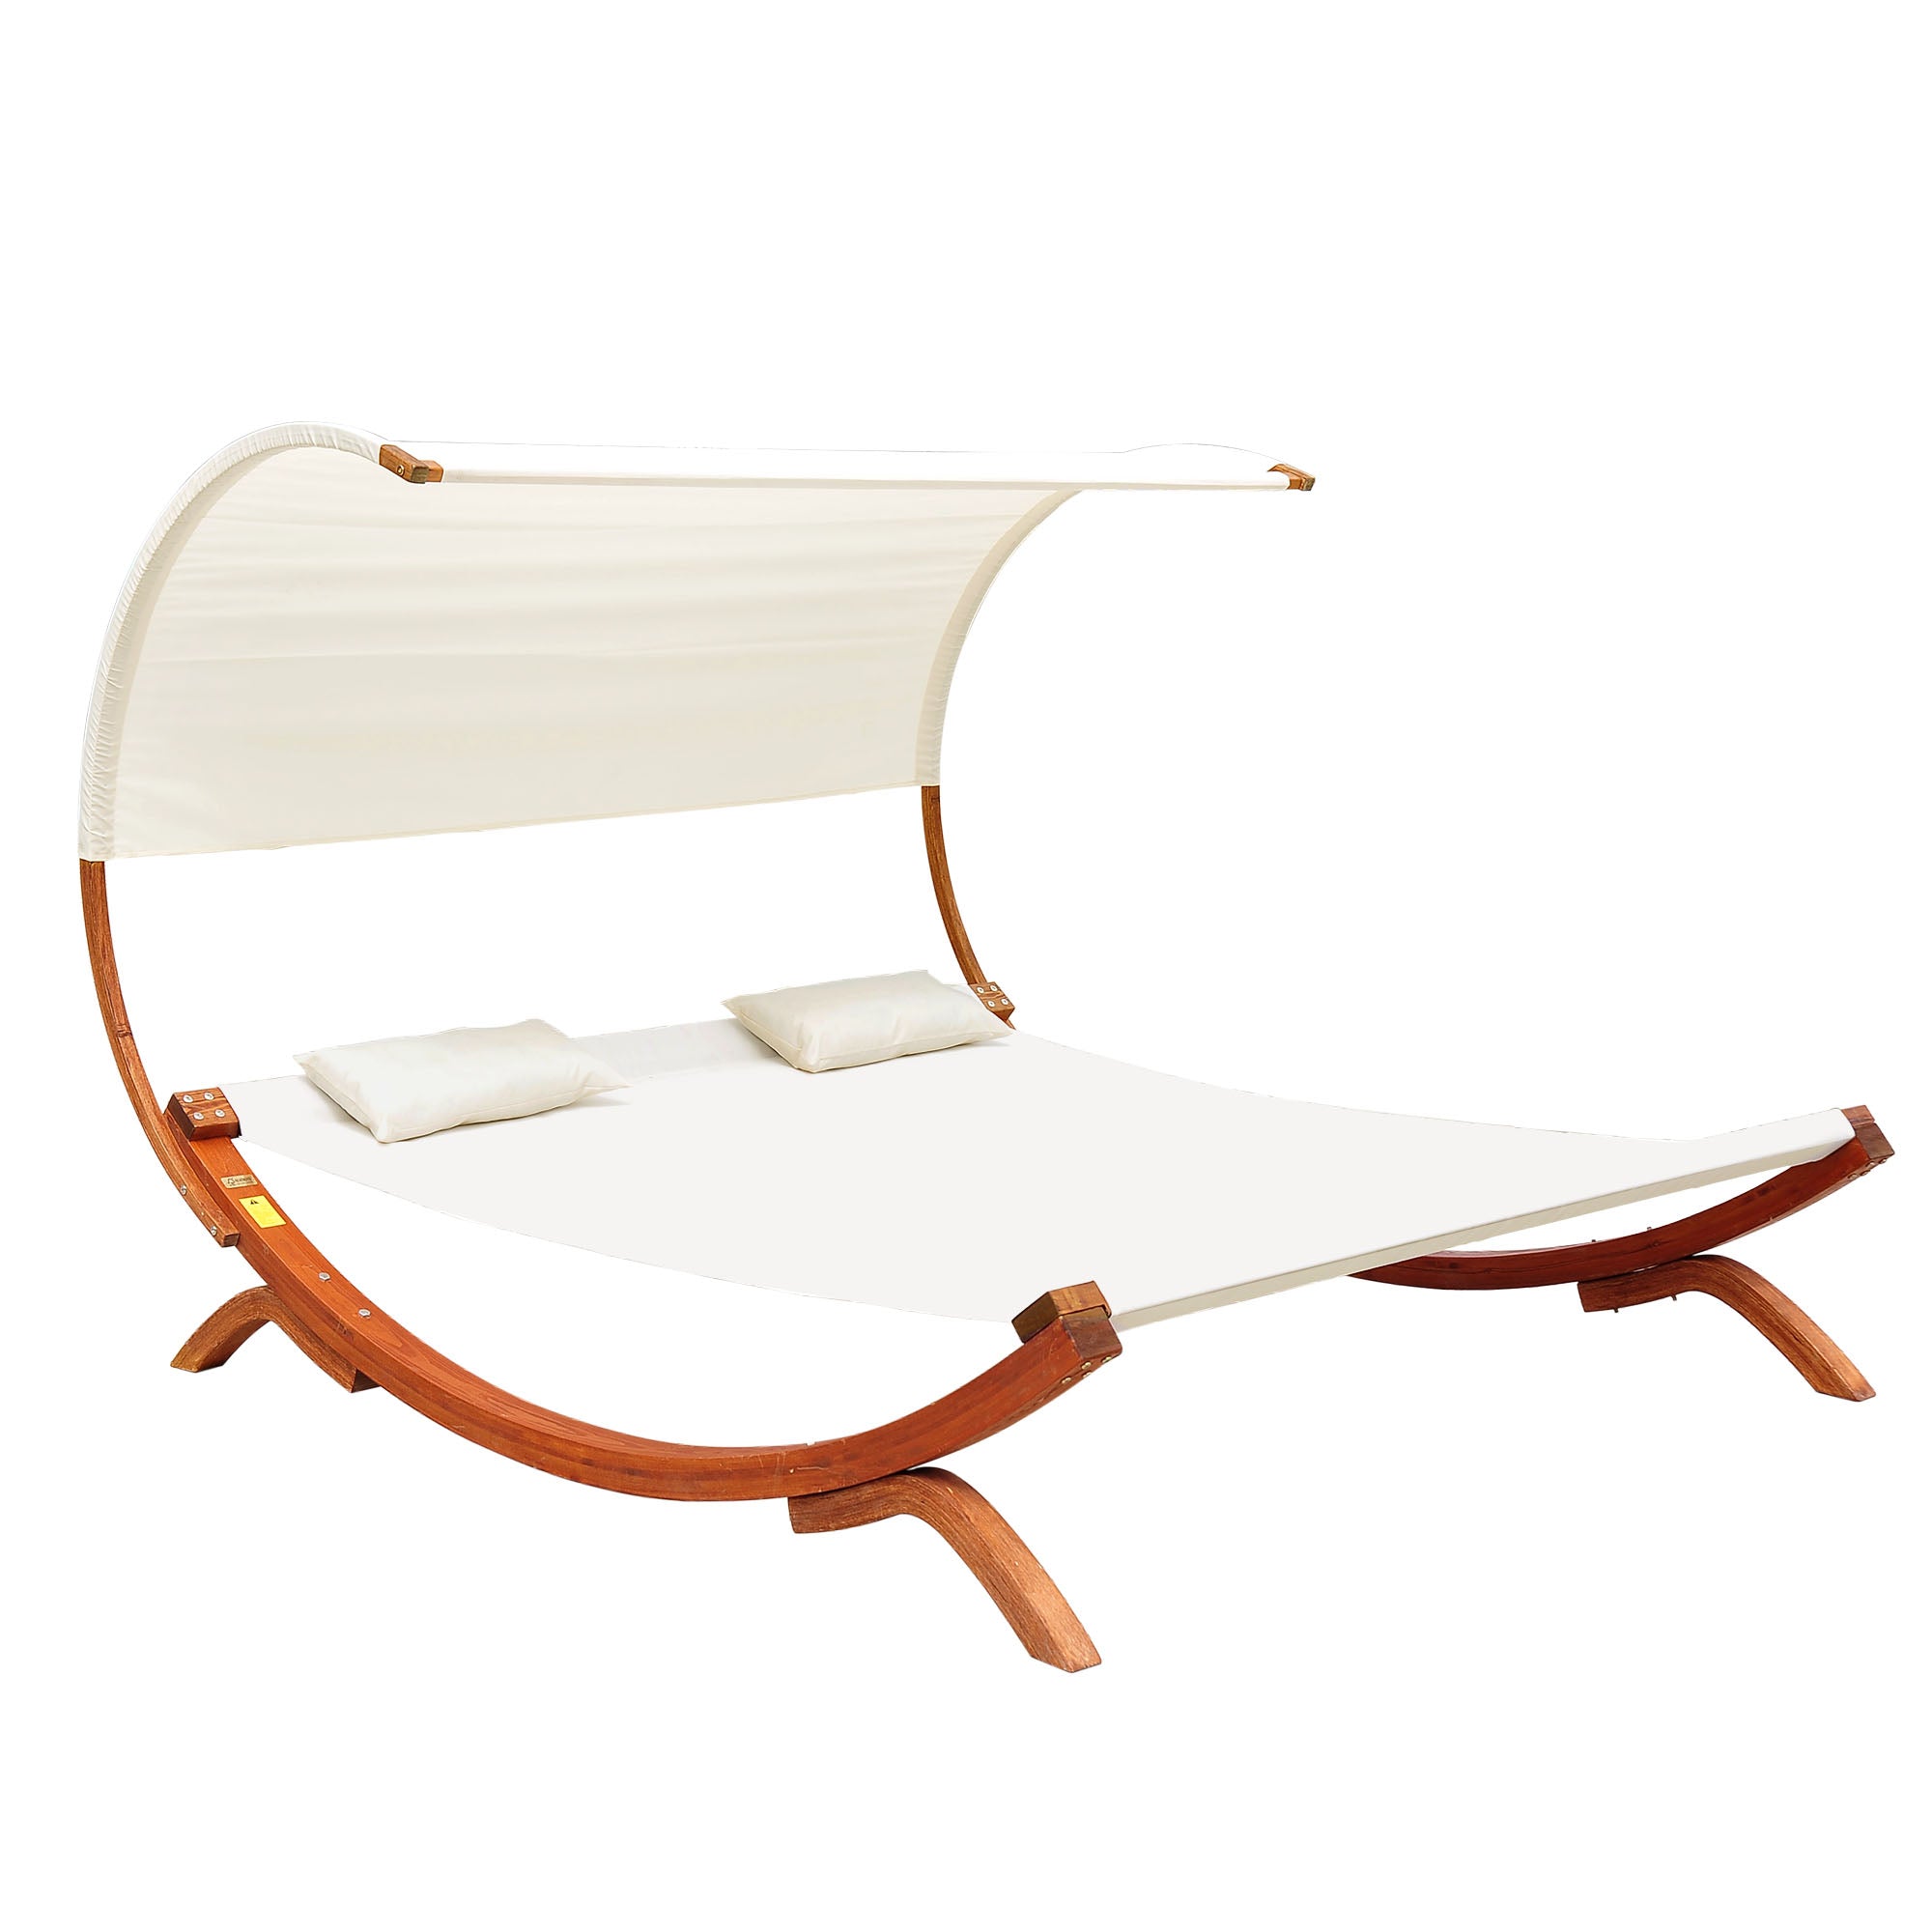 Hammock Chaise Day Bed with Canopy Wooden Double Sun Lounger - Cream-0